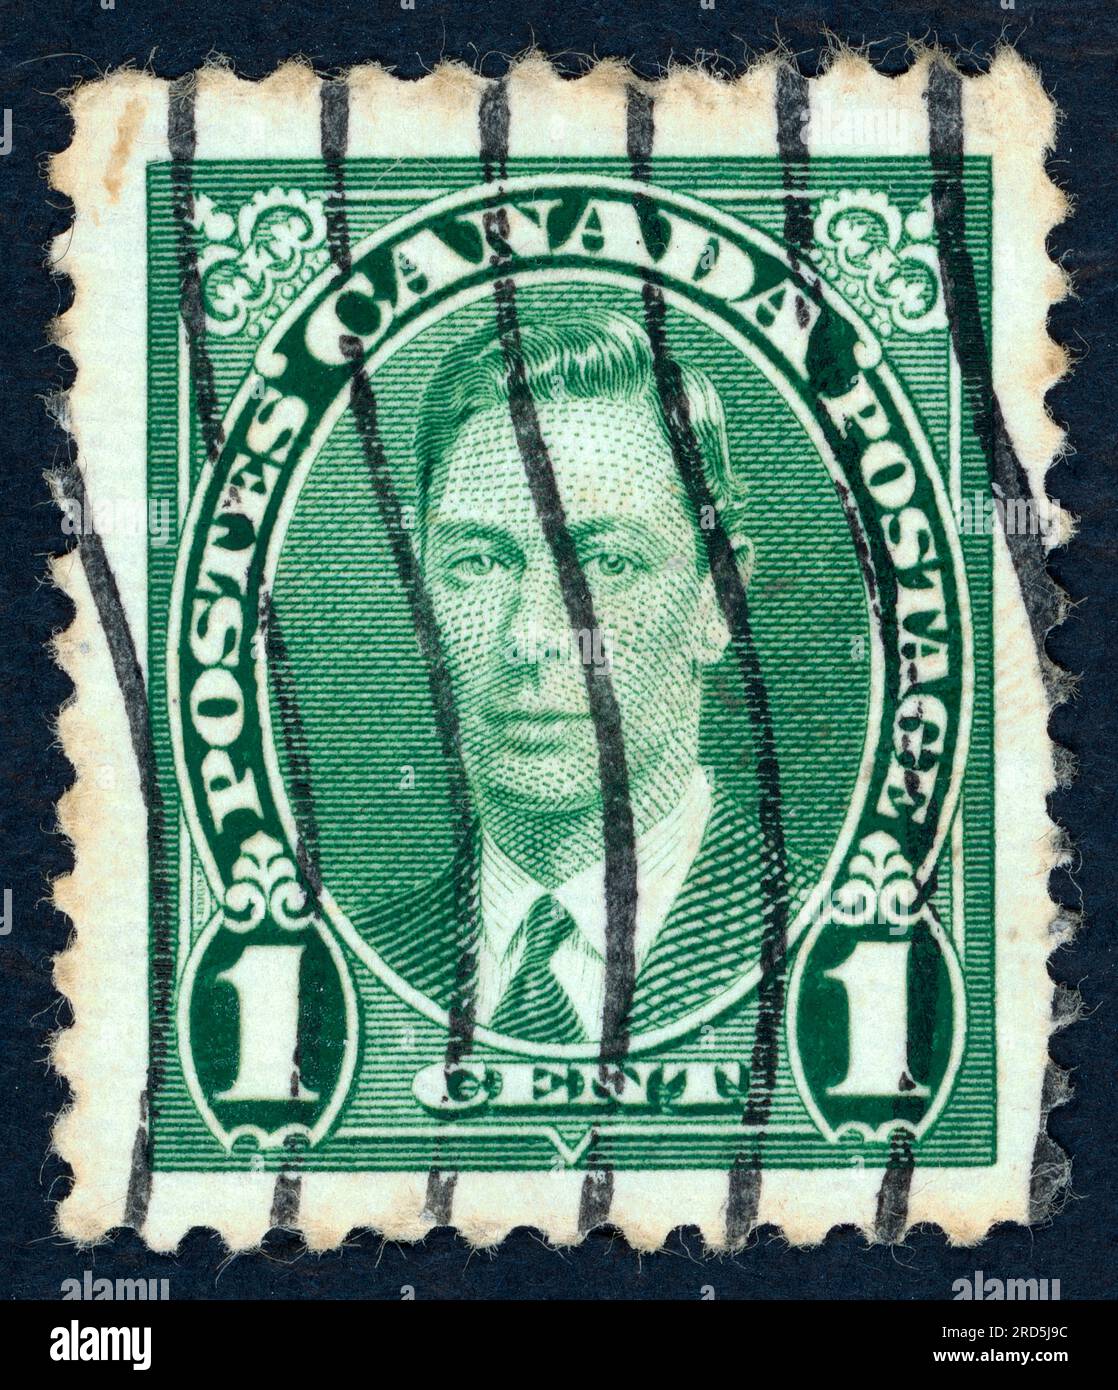 George VI (Albert Frederick Arthur George; 1895 – 1952), King of the United Kingdom and the Dominions of the British Commonwealth from 1936 until his death in 1952. Postage stamp issued in Canada in 1937. Stock Photo